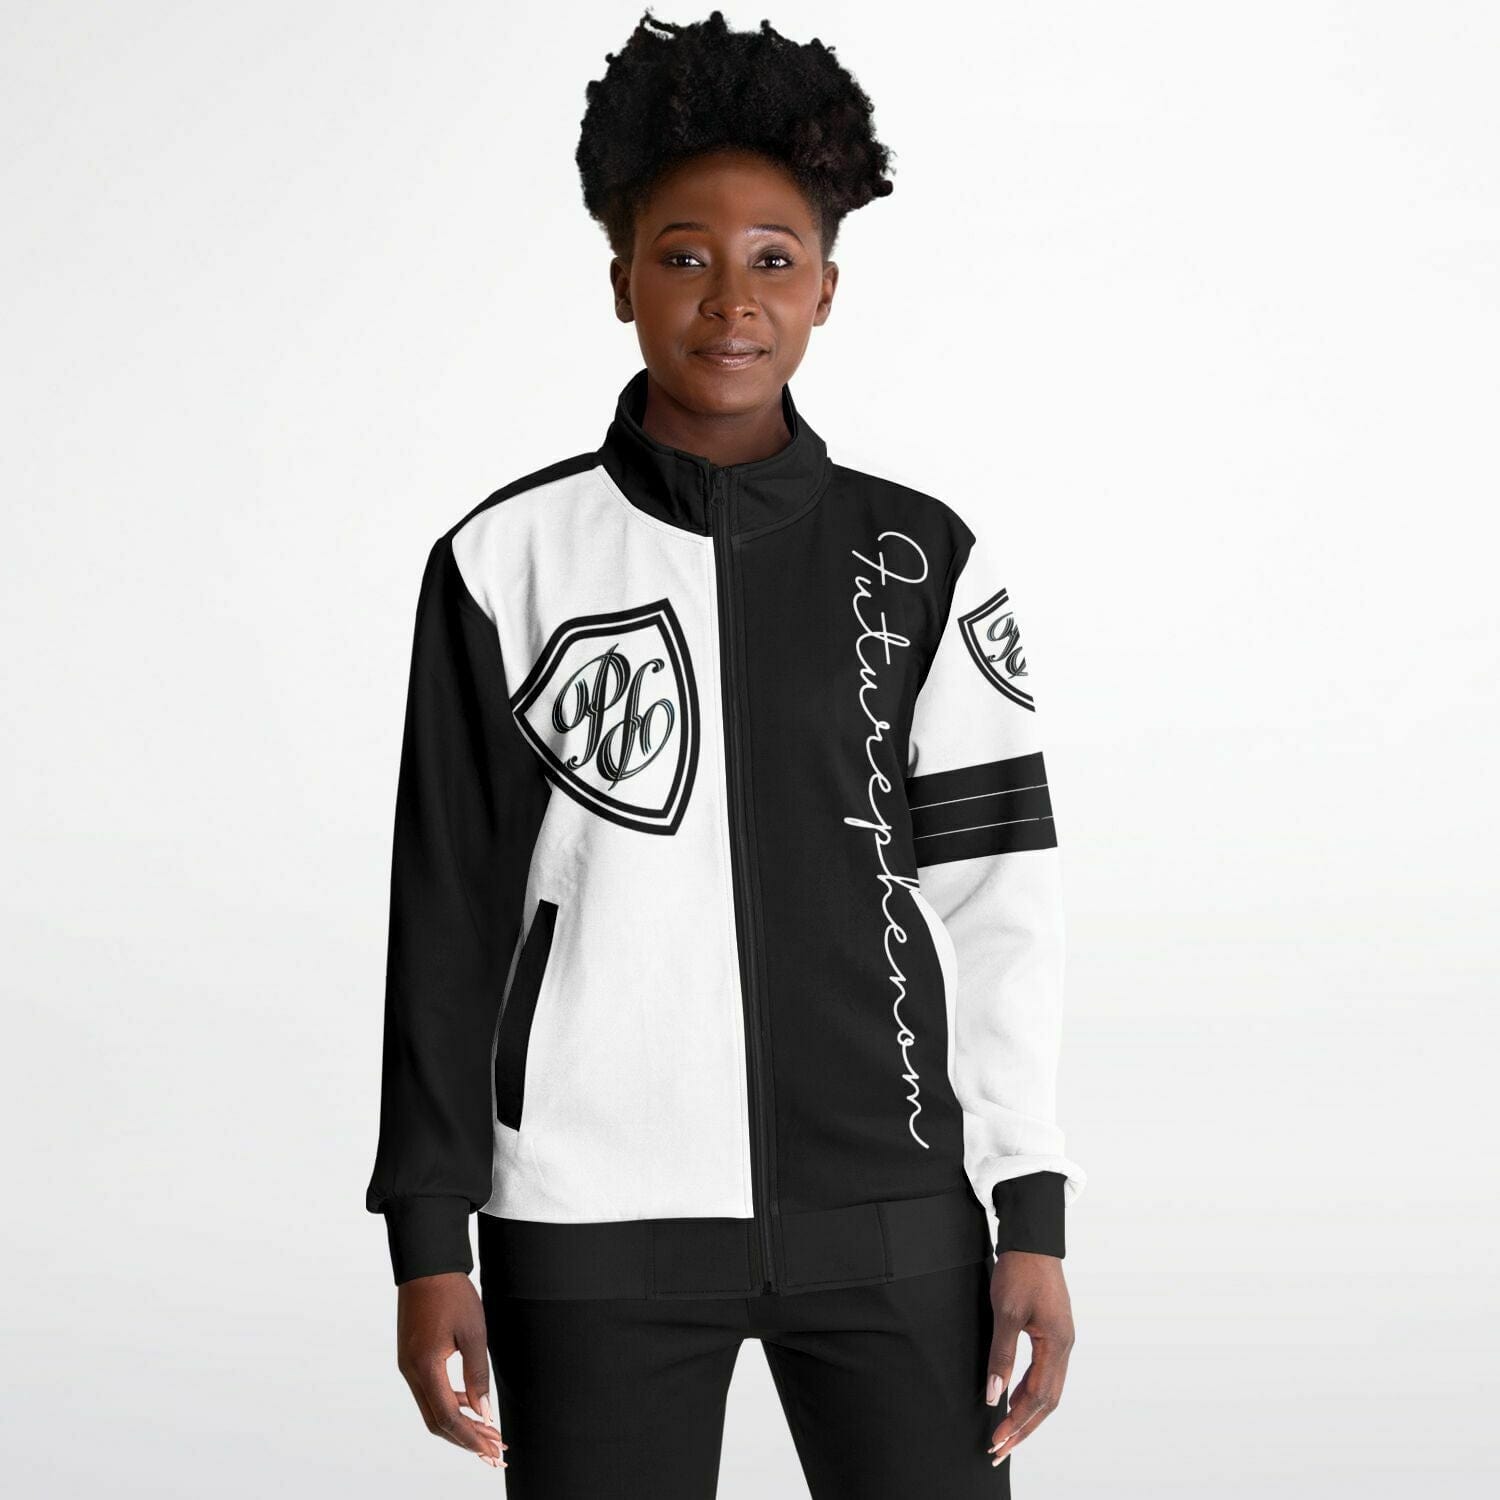 Track Jacket - AOP Protect the shield classic black-white track jacket